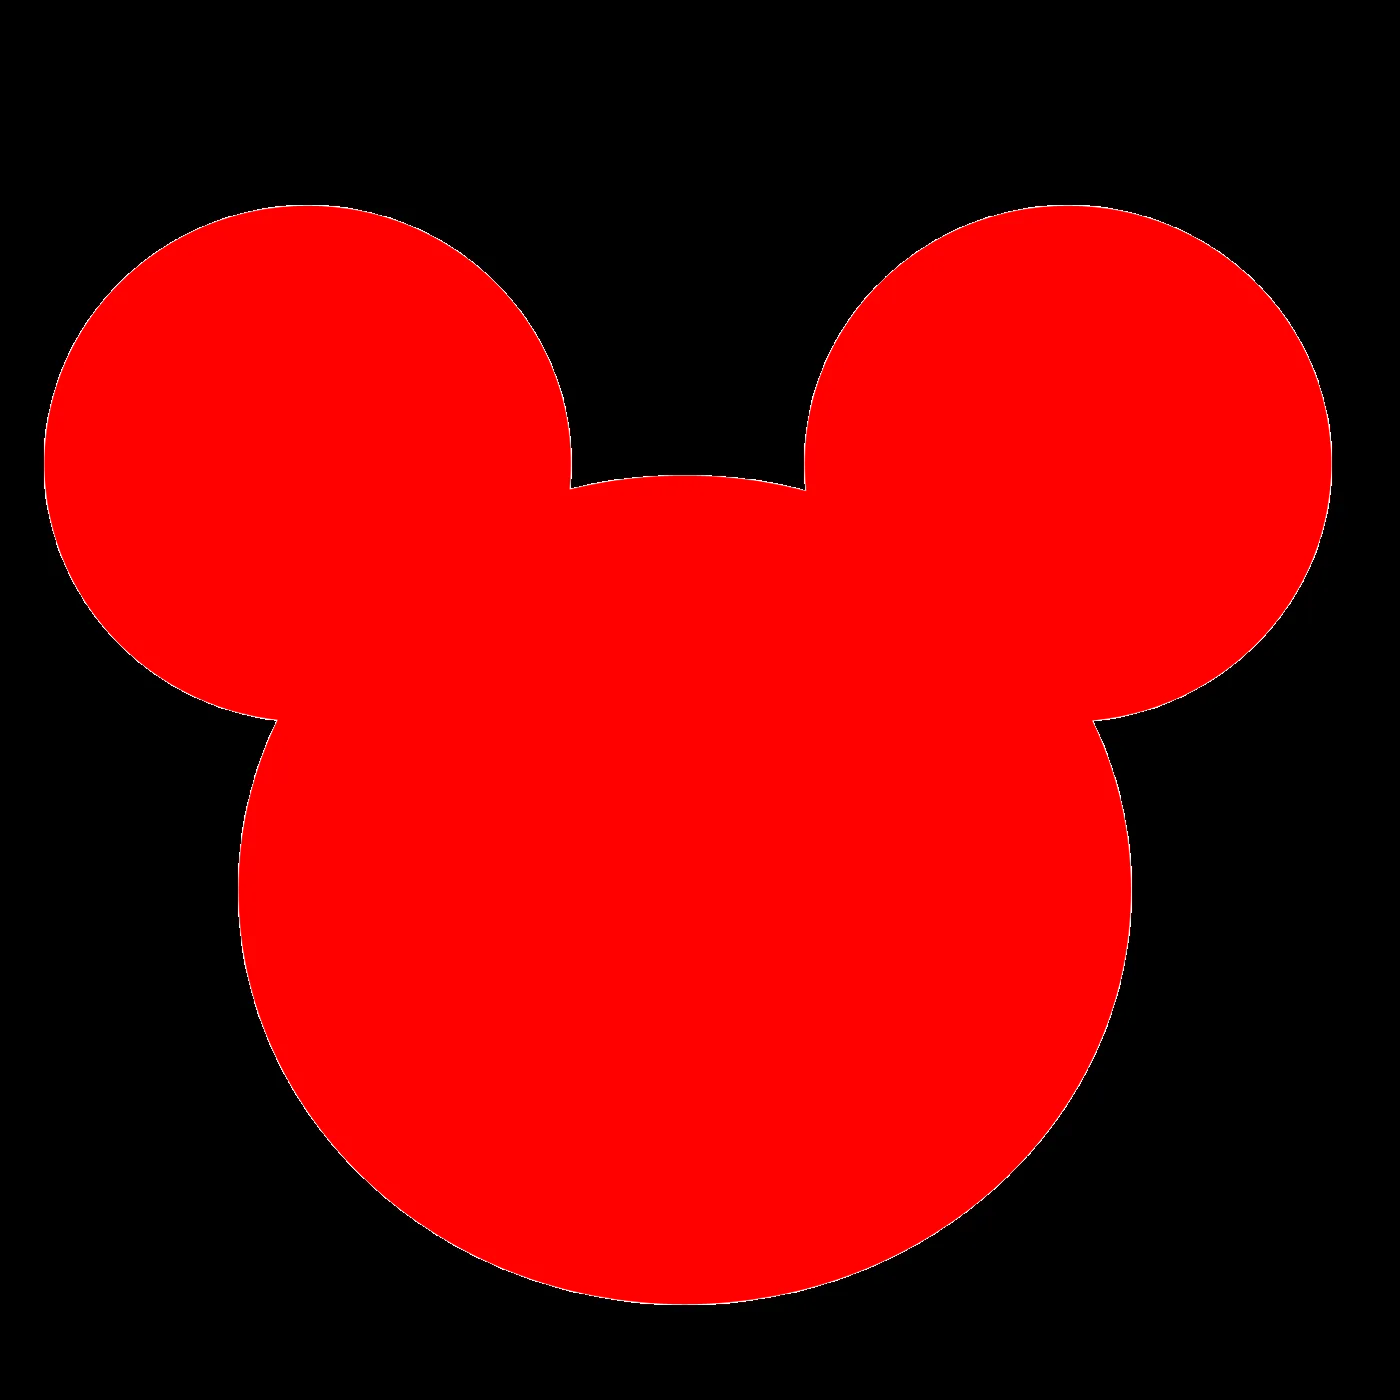 Mickey Mouse Face Clip Art - Cliparts.